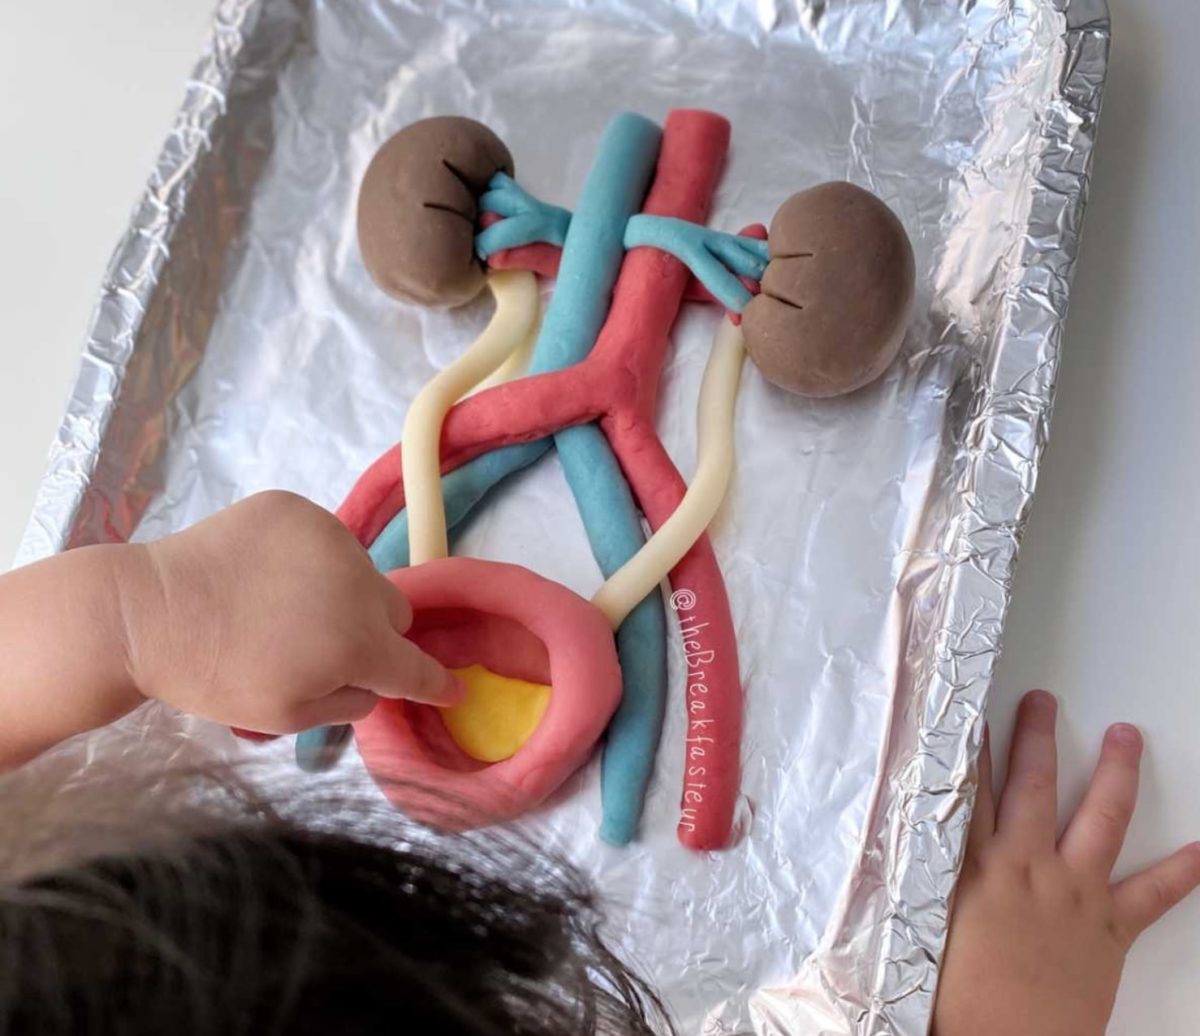 Mom Creates 'Play-Doh Surgeries' For 3-Year-Old Son